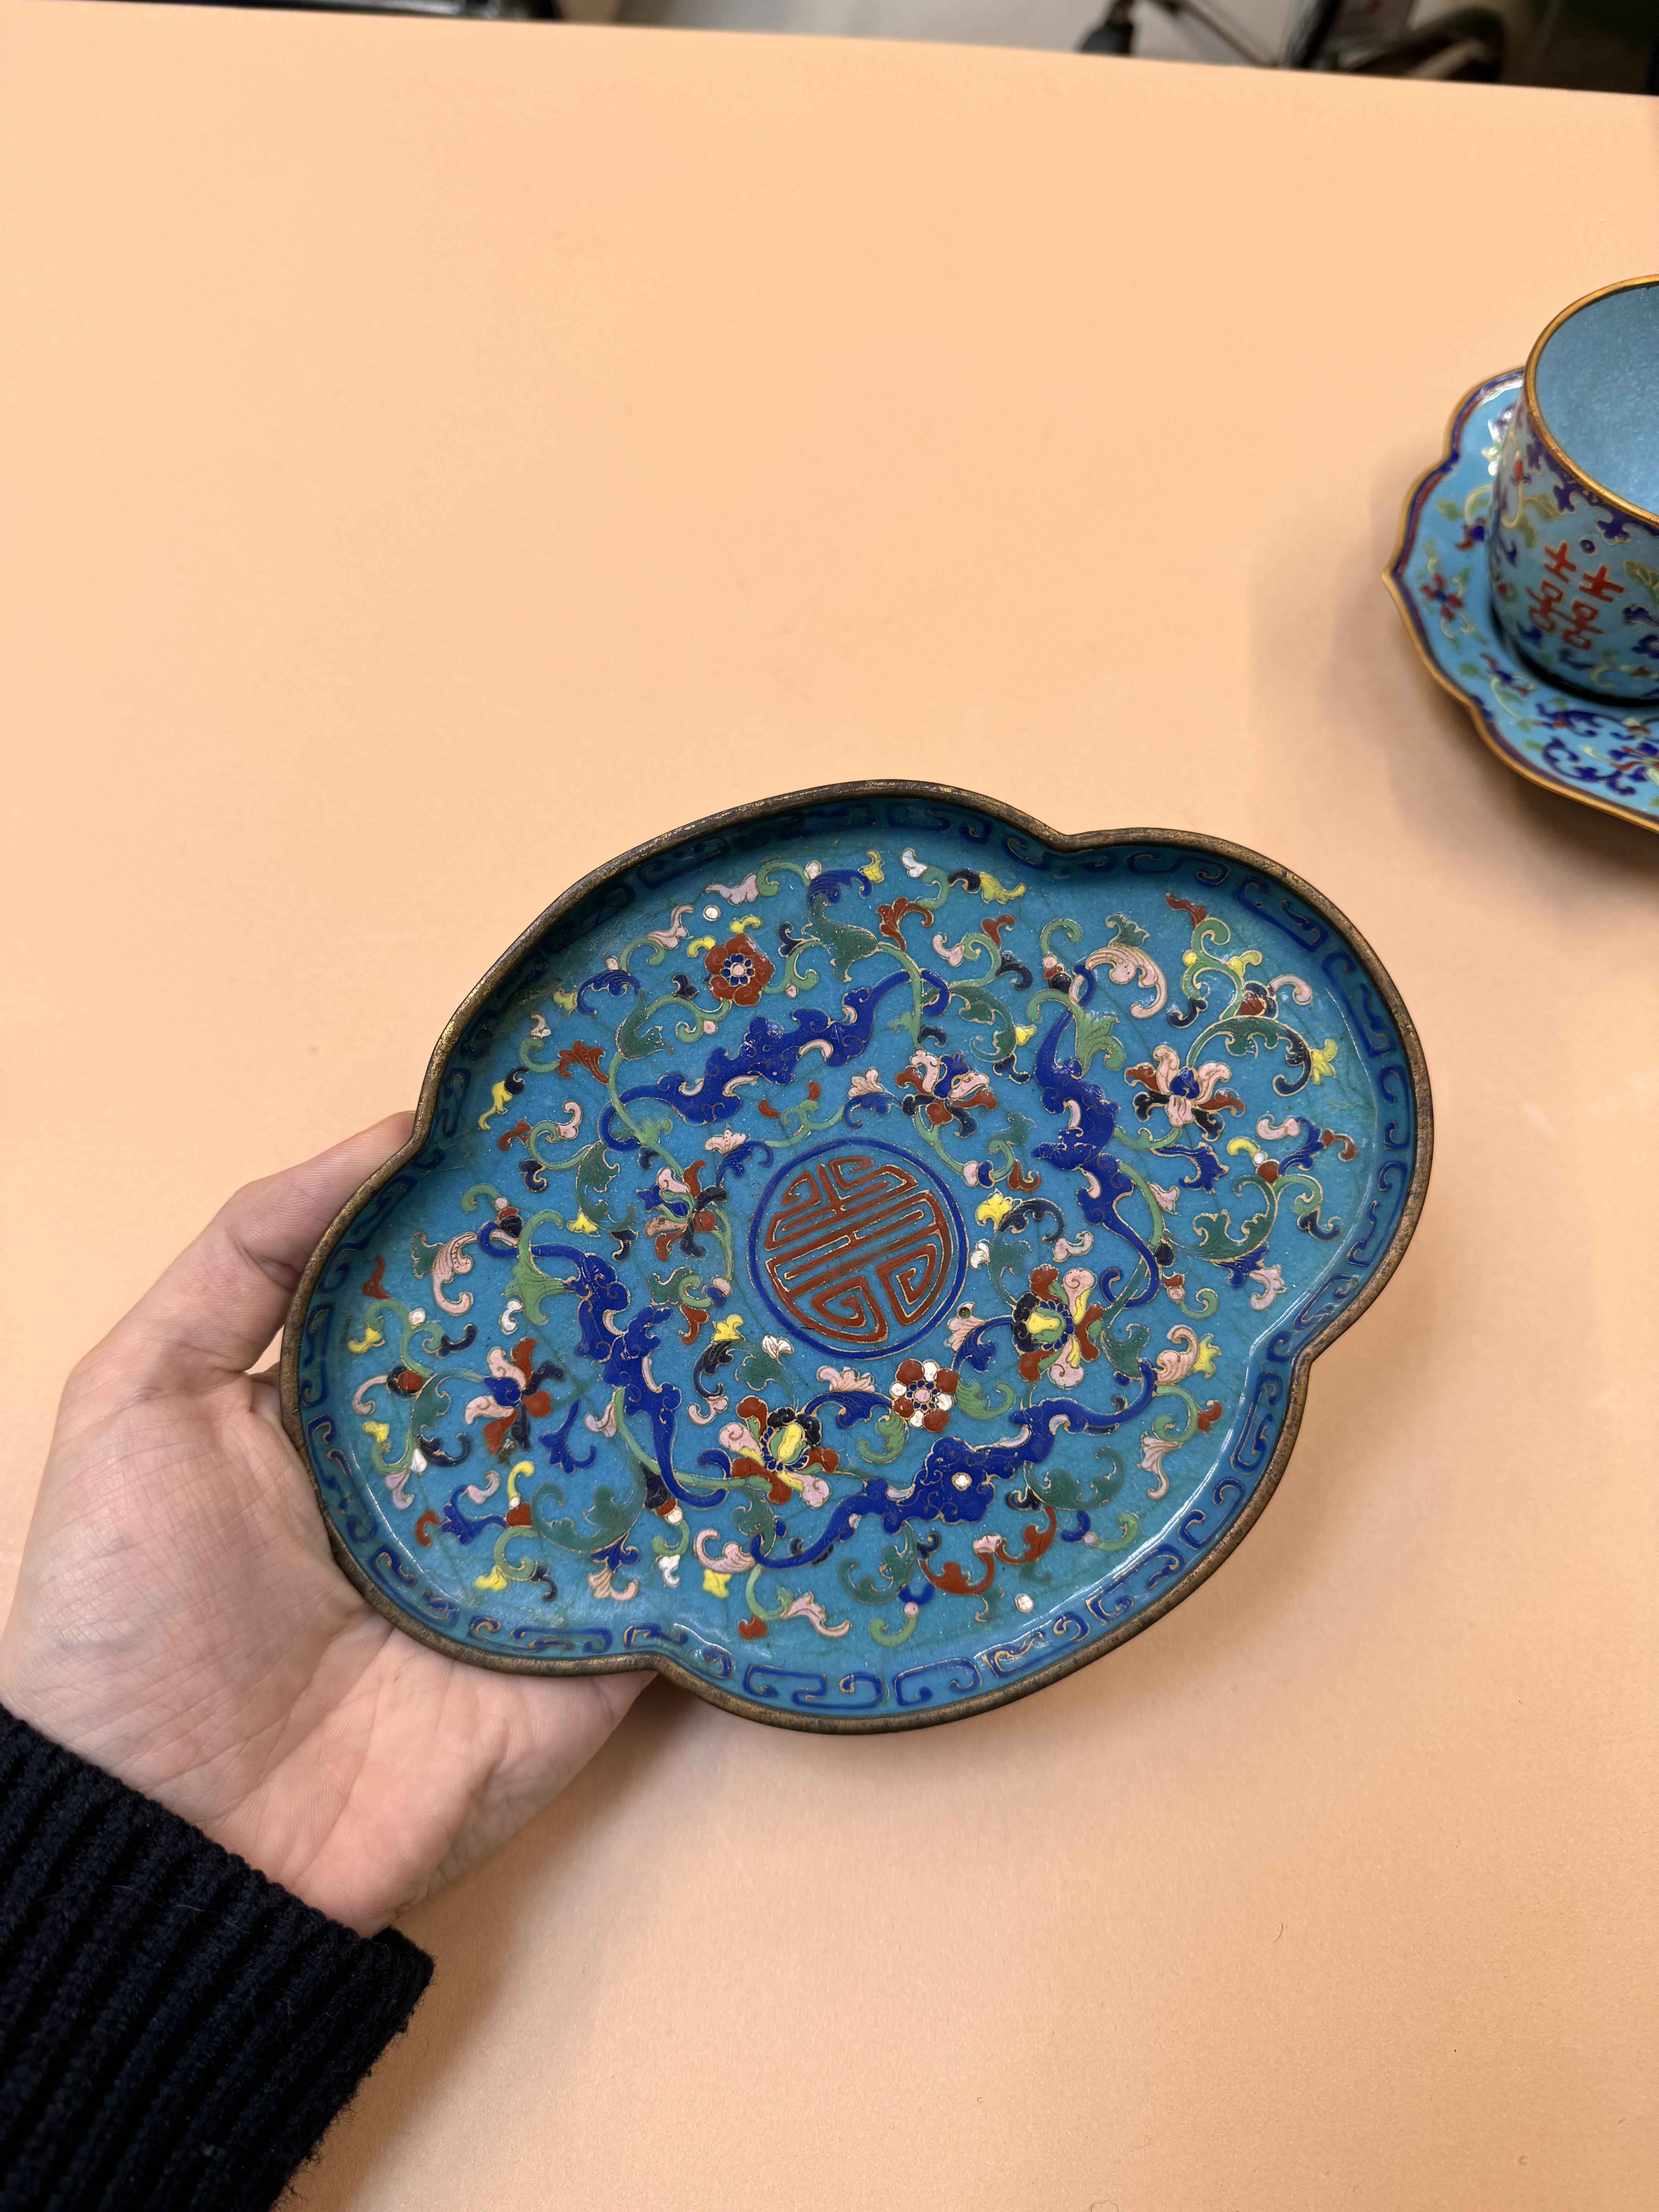 A CHINESE CANTON ENAMEL CUP, STAND AND DISH 清十九世紀 廣東銅胎畫琺瑯「壽」盤及「囍」盃及盤 - Image 27 of 31